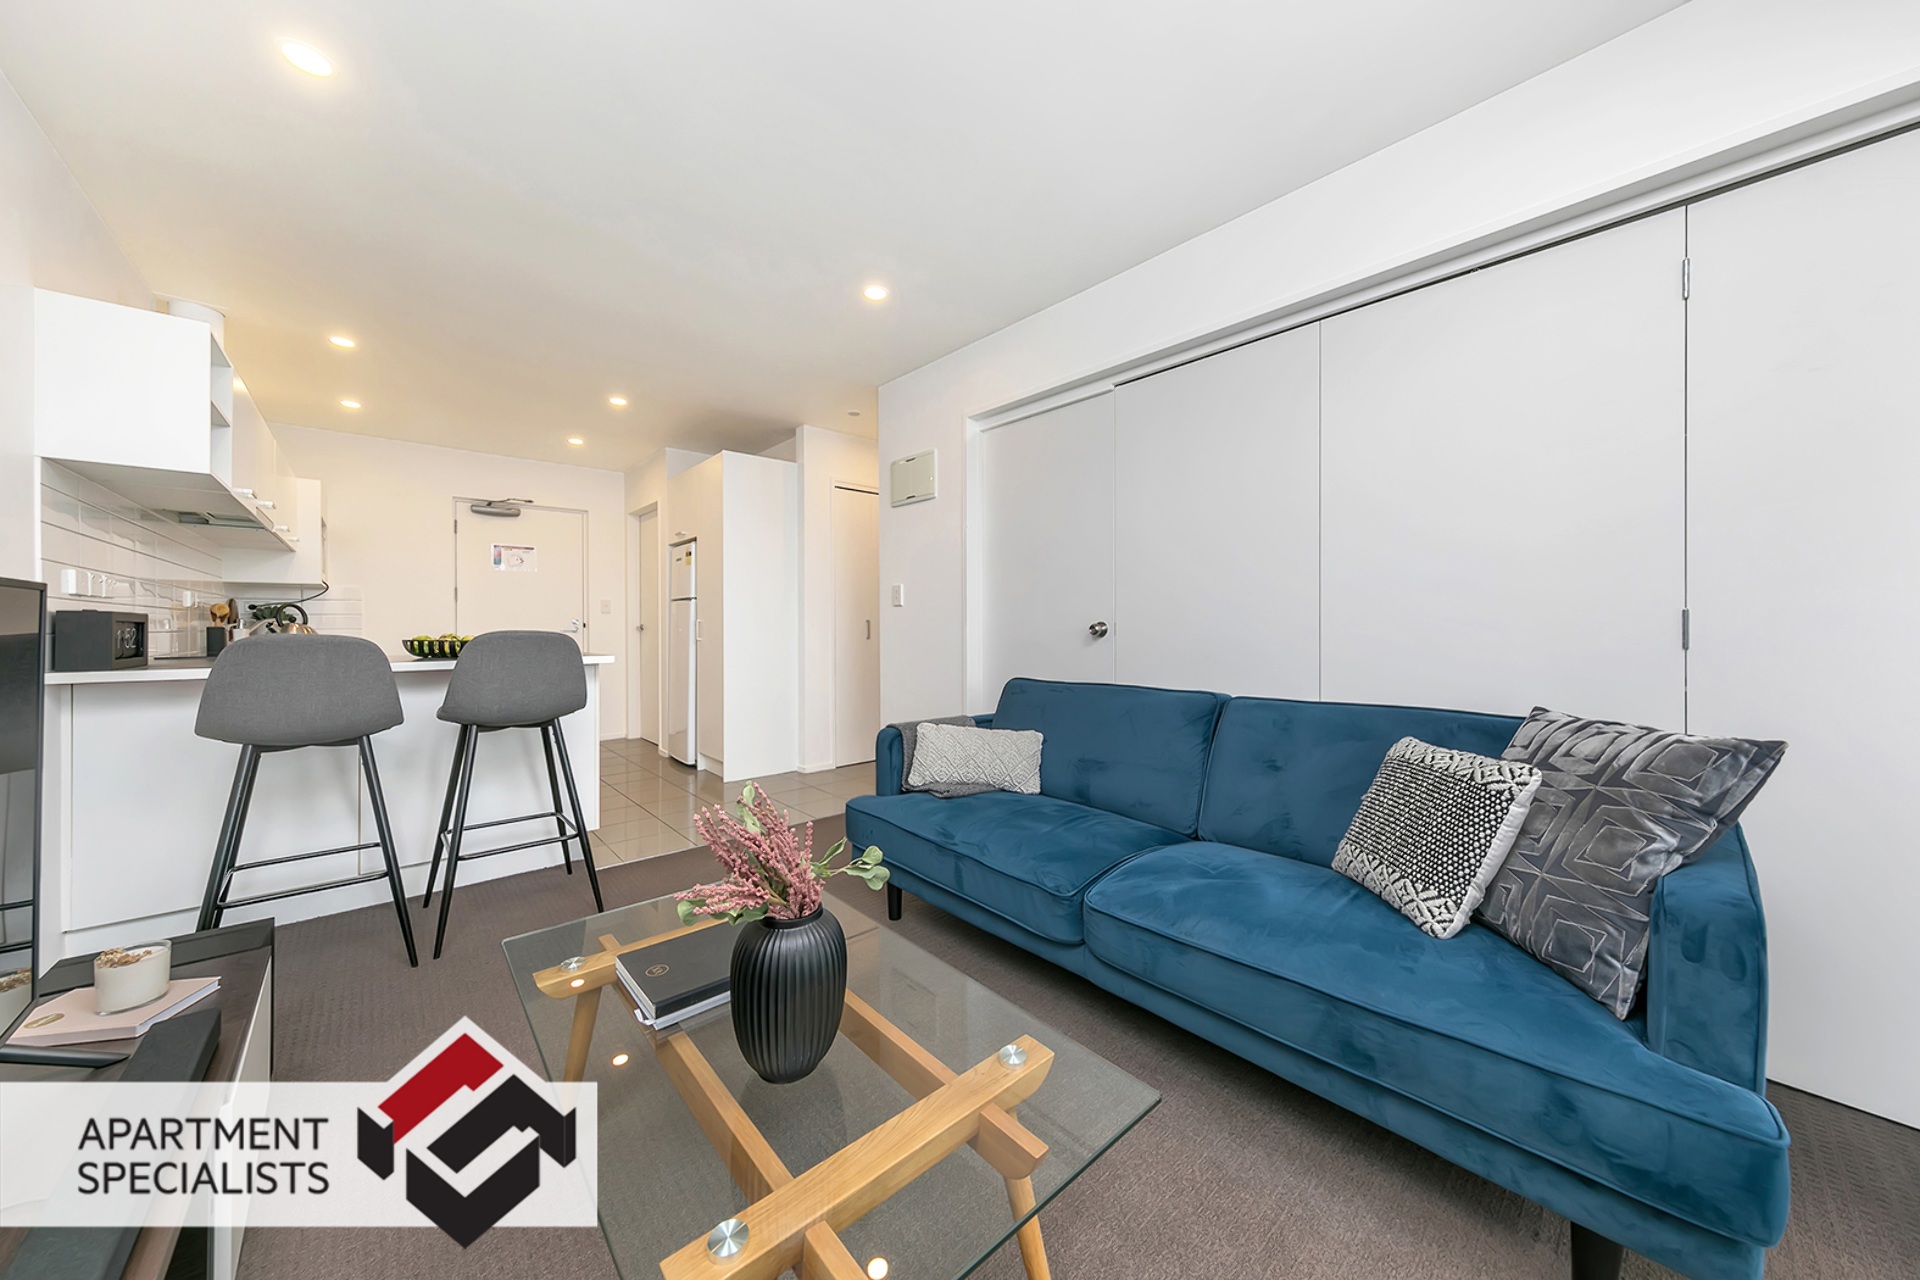 1 | 71 Spencer Road, Albany | Apartment Specialists